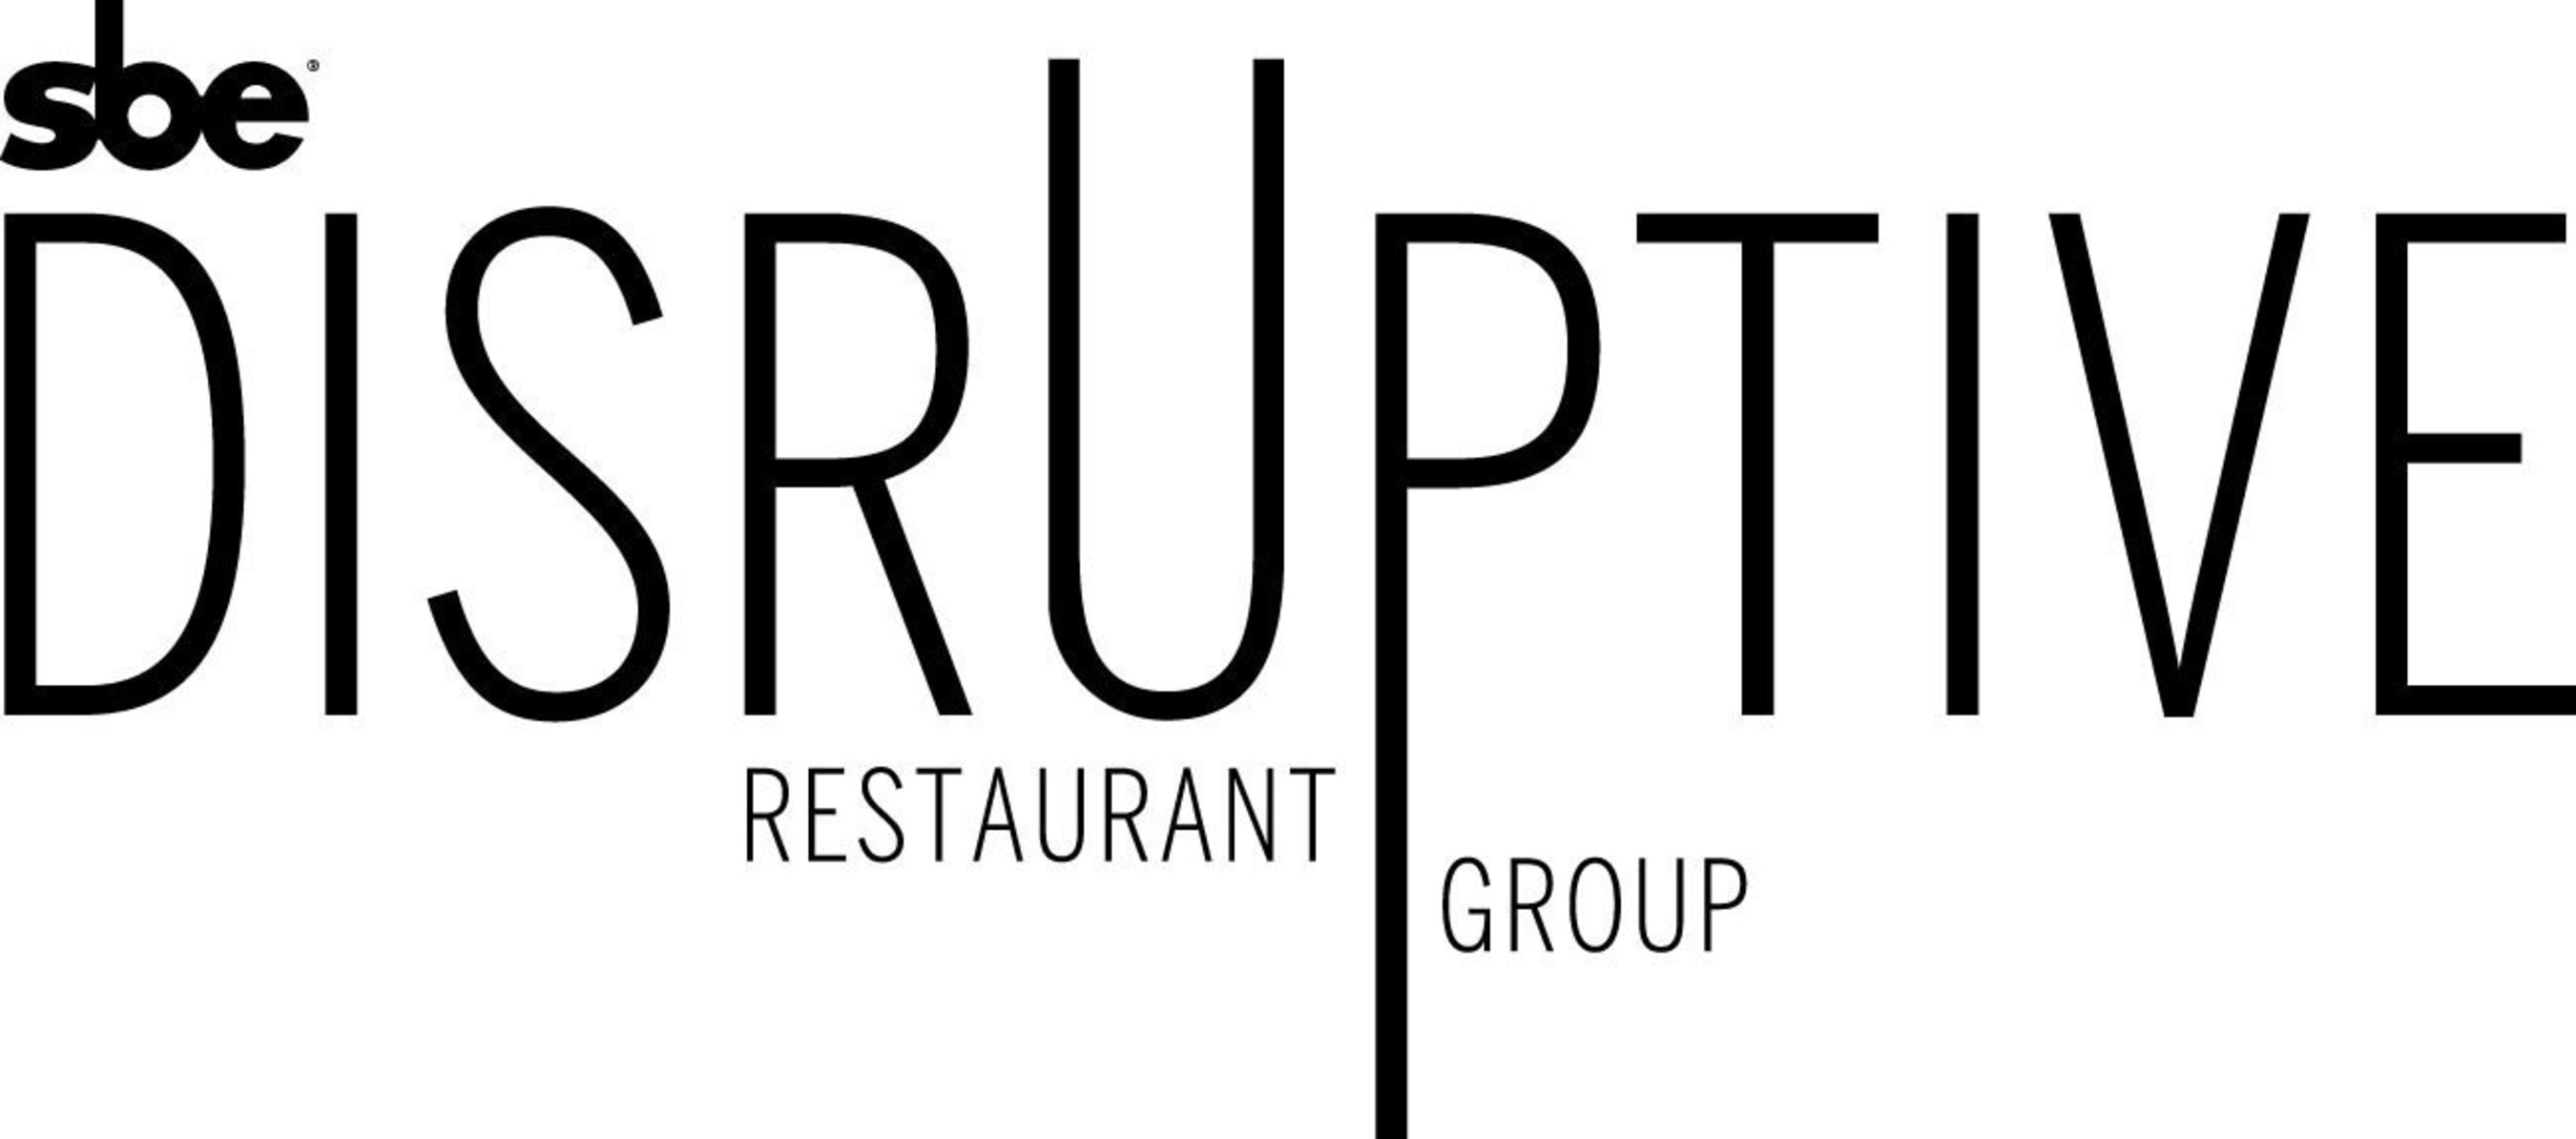 Disruptive Restaurant Group is the leading restaurant company devoted to the development of visionary concepts and award-winning culinary experiences.